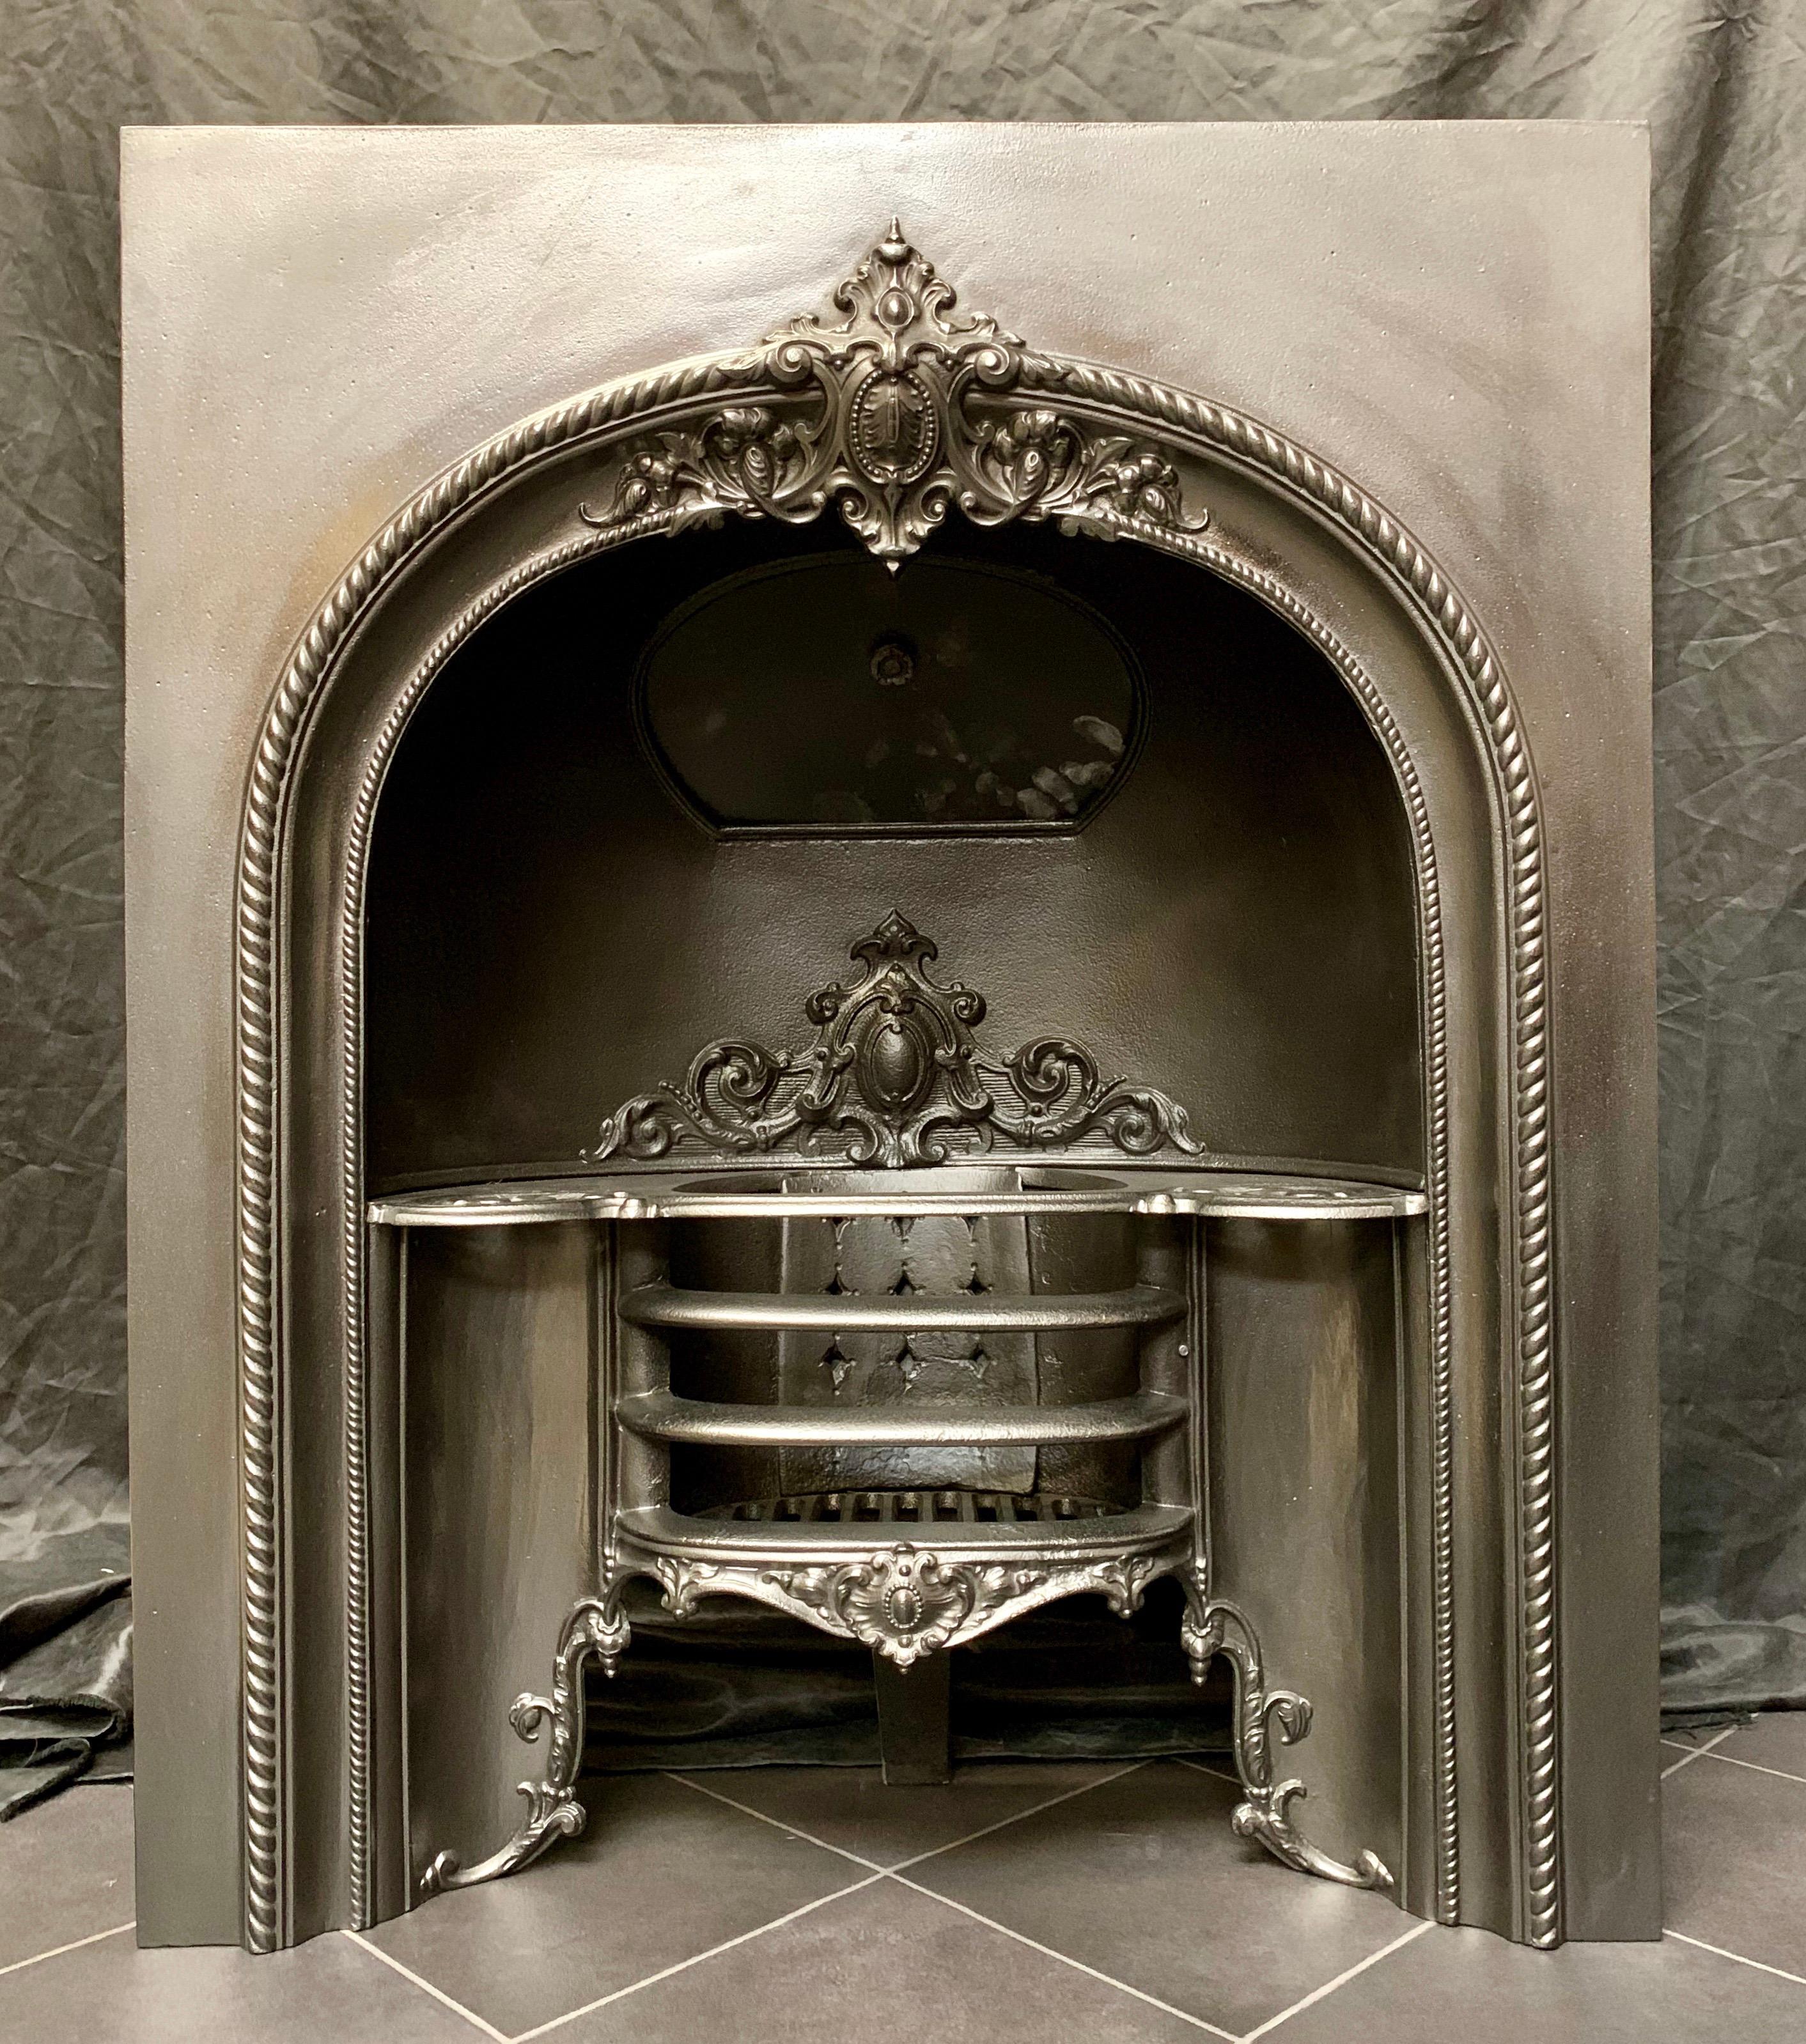 A medium sized 19th century Victorian cast iron fireplace insert, showing good quality casting, probably cast in Falkirk, Scotland, circa 1860.